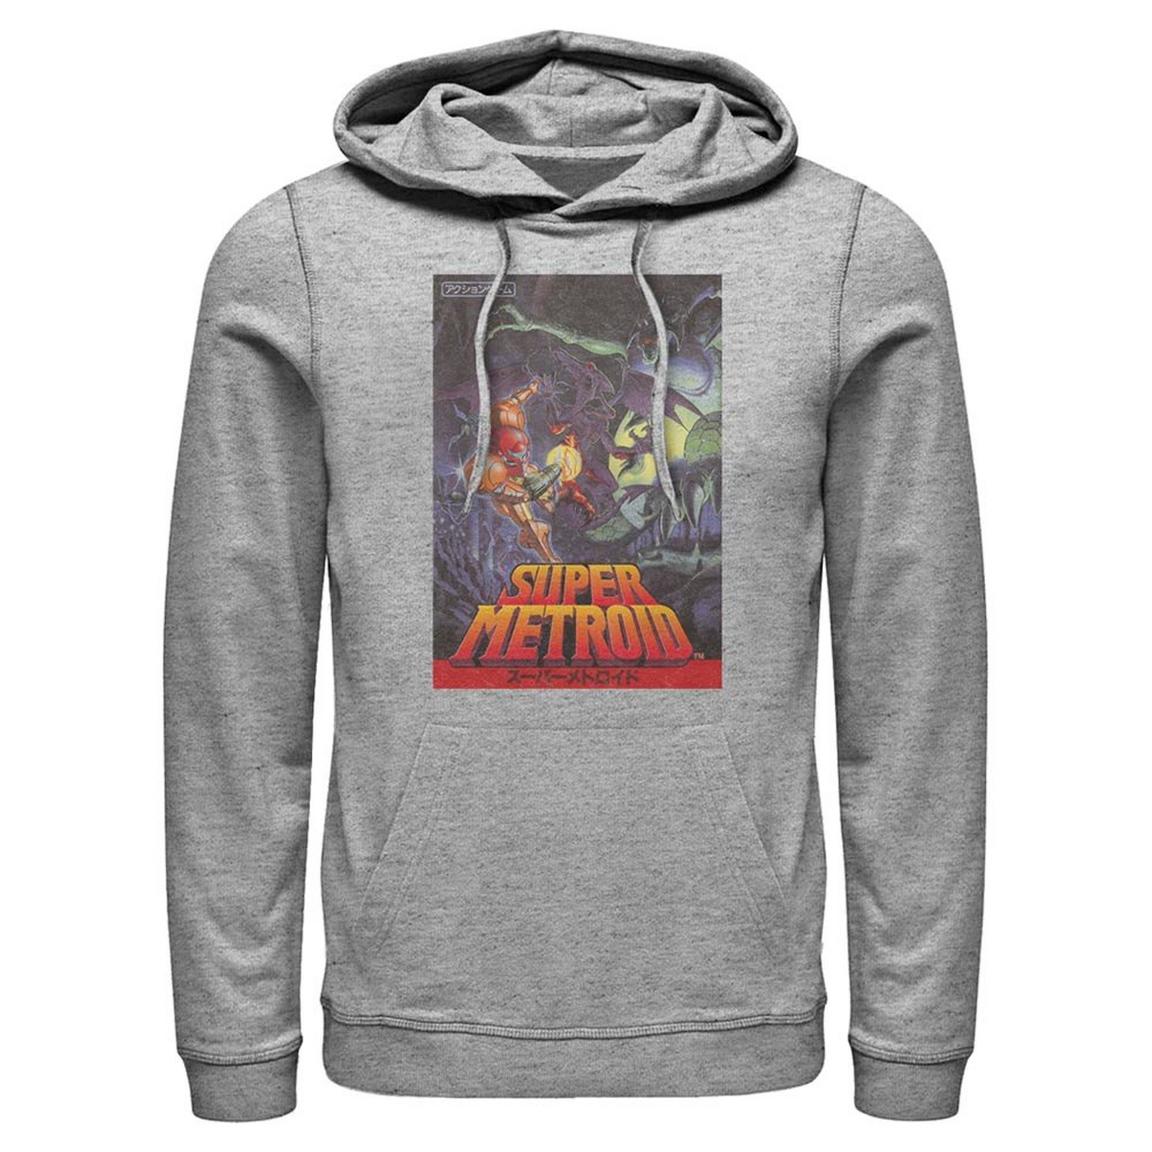 Super Metroid Game Cover Hooded Sweatshirt, Size: 3XL, Fifth Sun